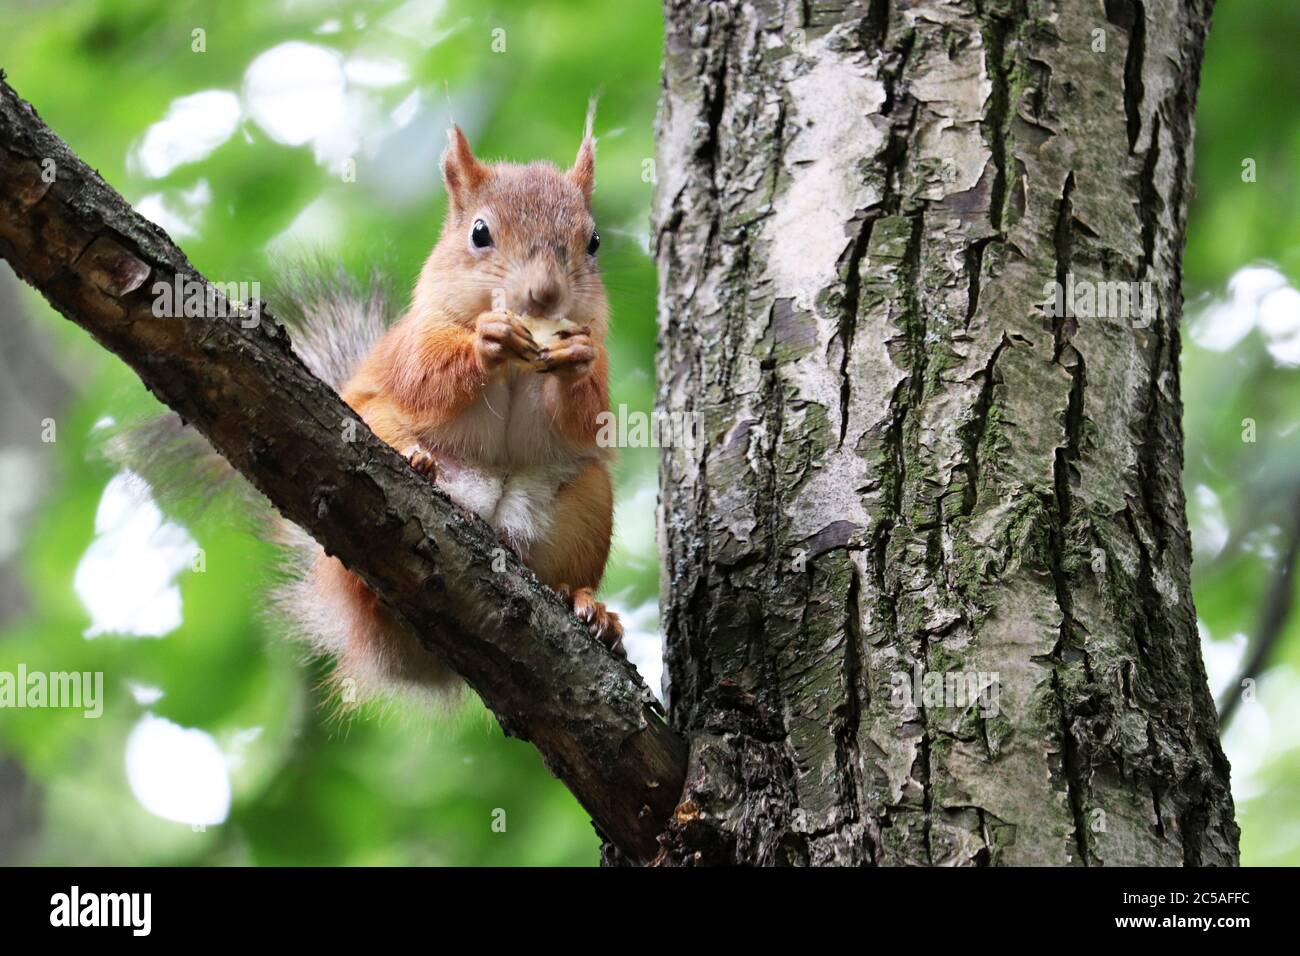 Red squirrel nibbles on food sitting on a tree branch in a summer forest Stock Photo